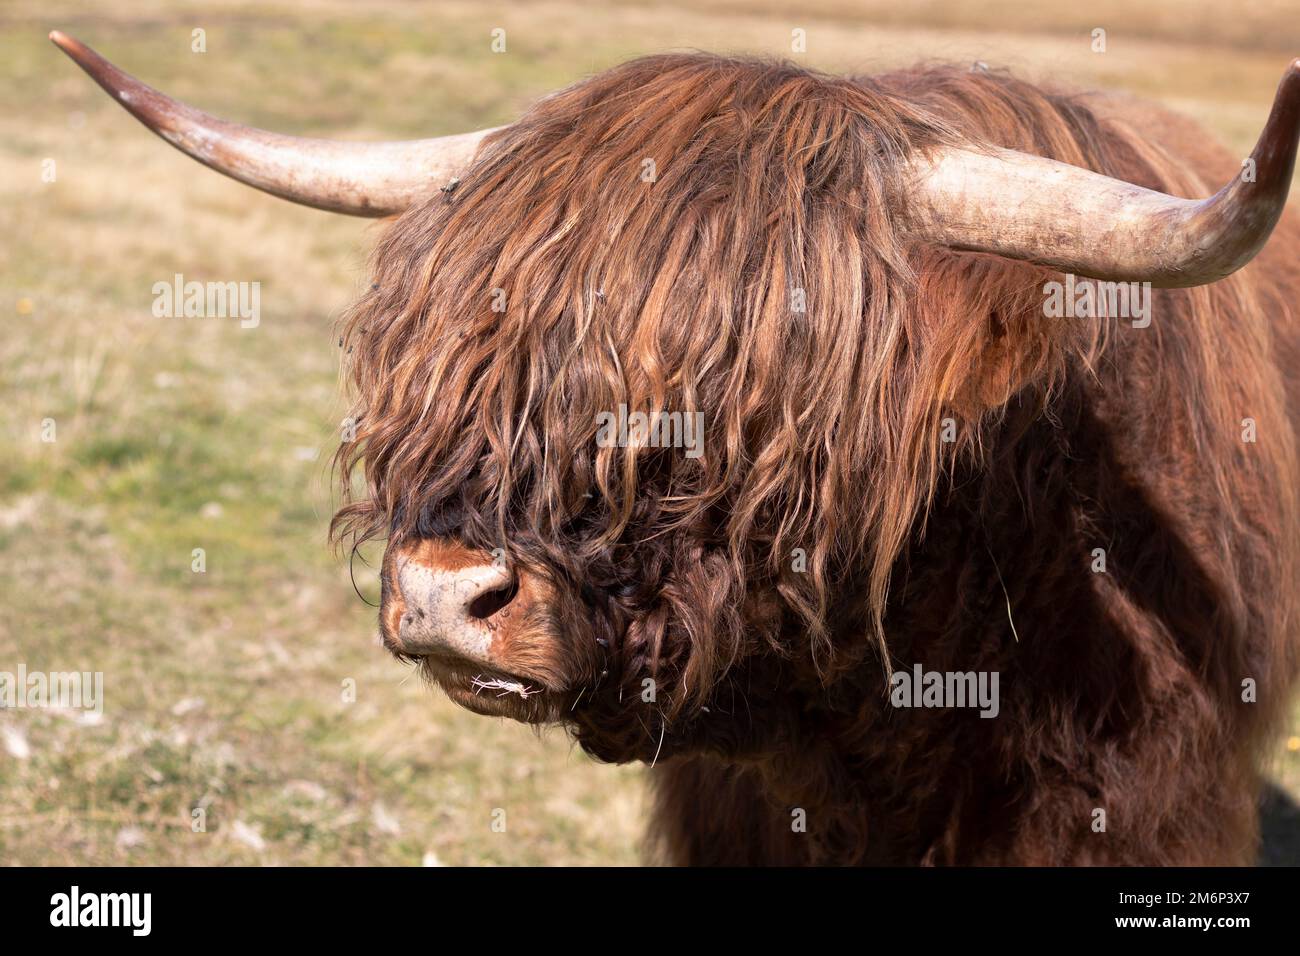 Highland cattle with long hair Stock Photo